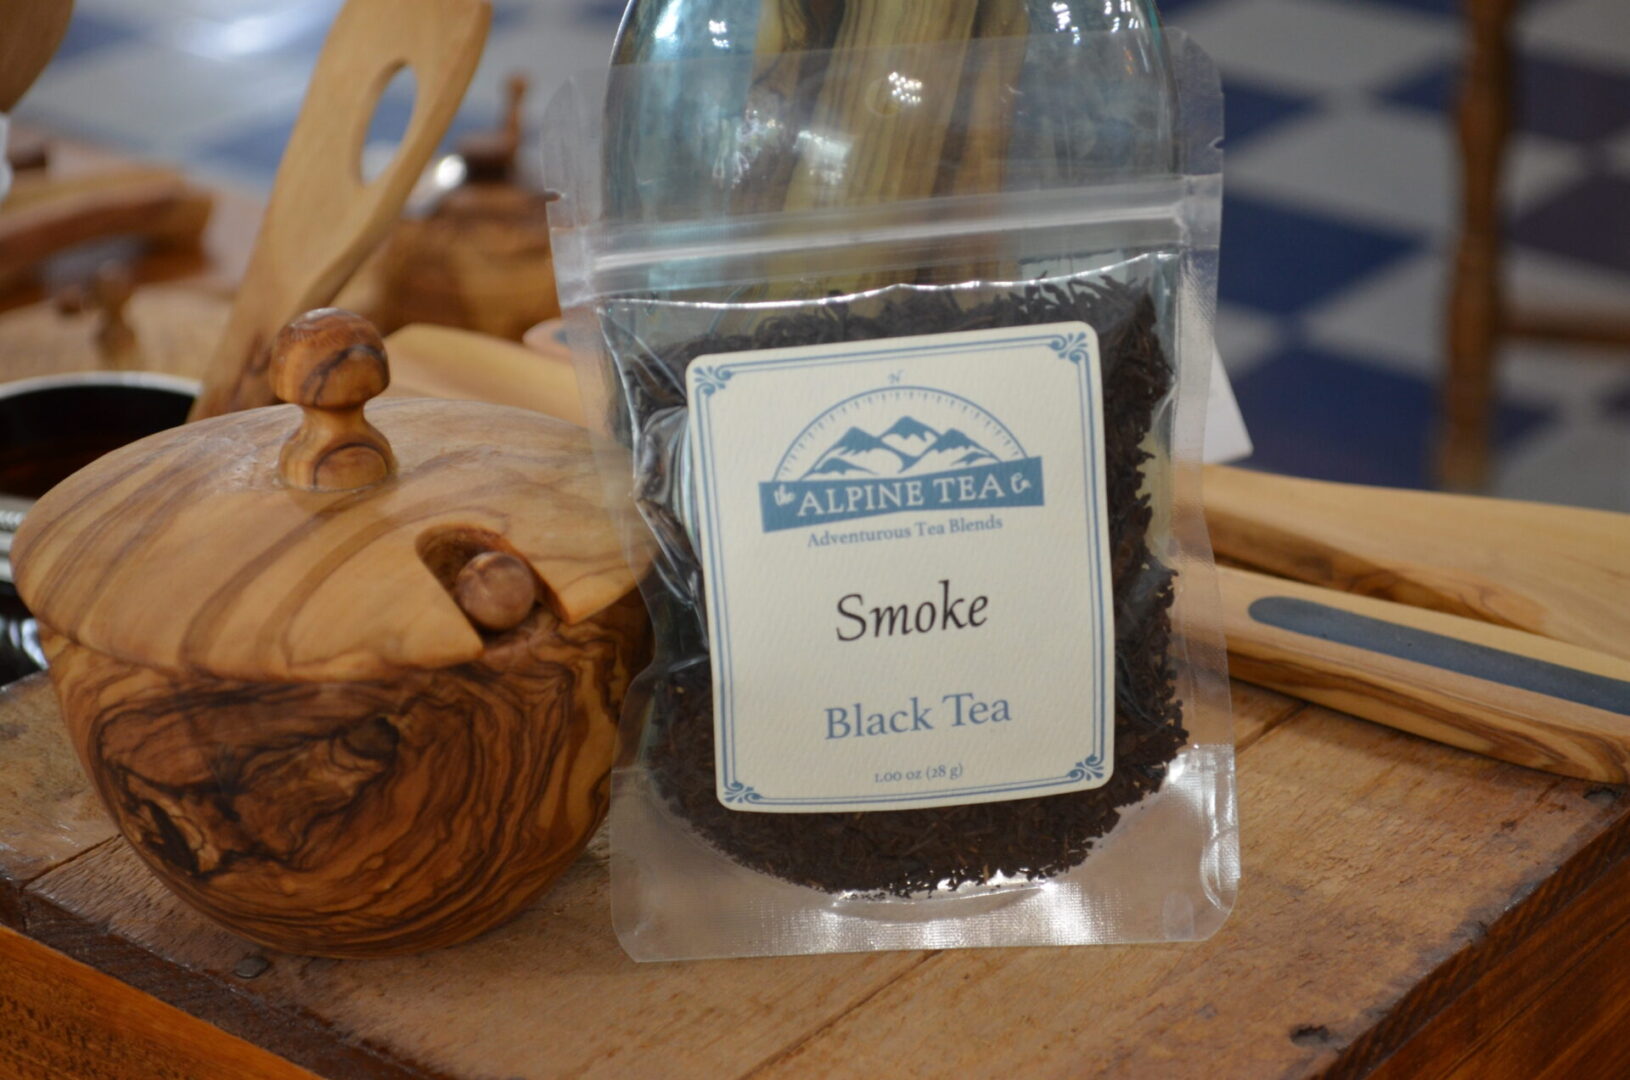 A bag of black tea on top of a table.